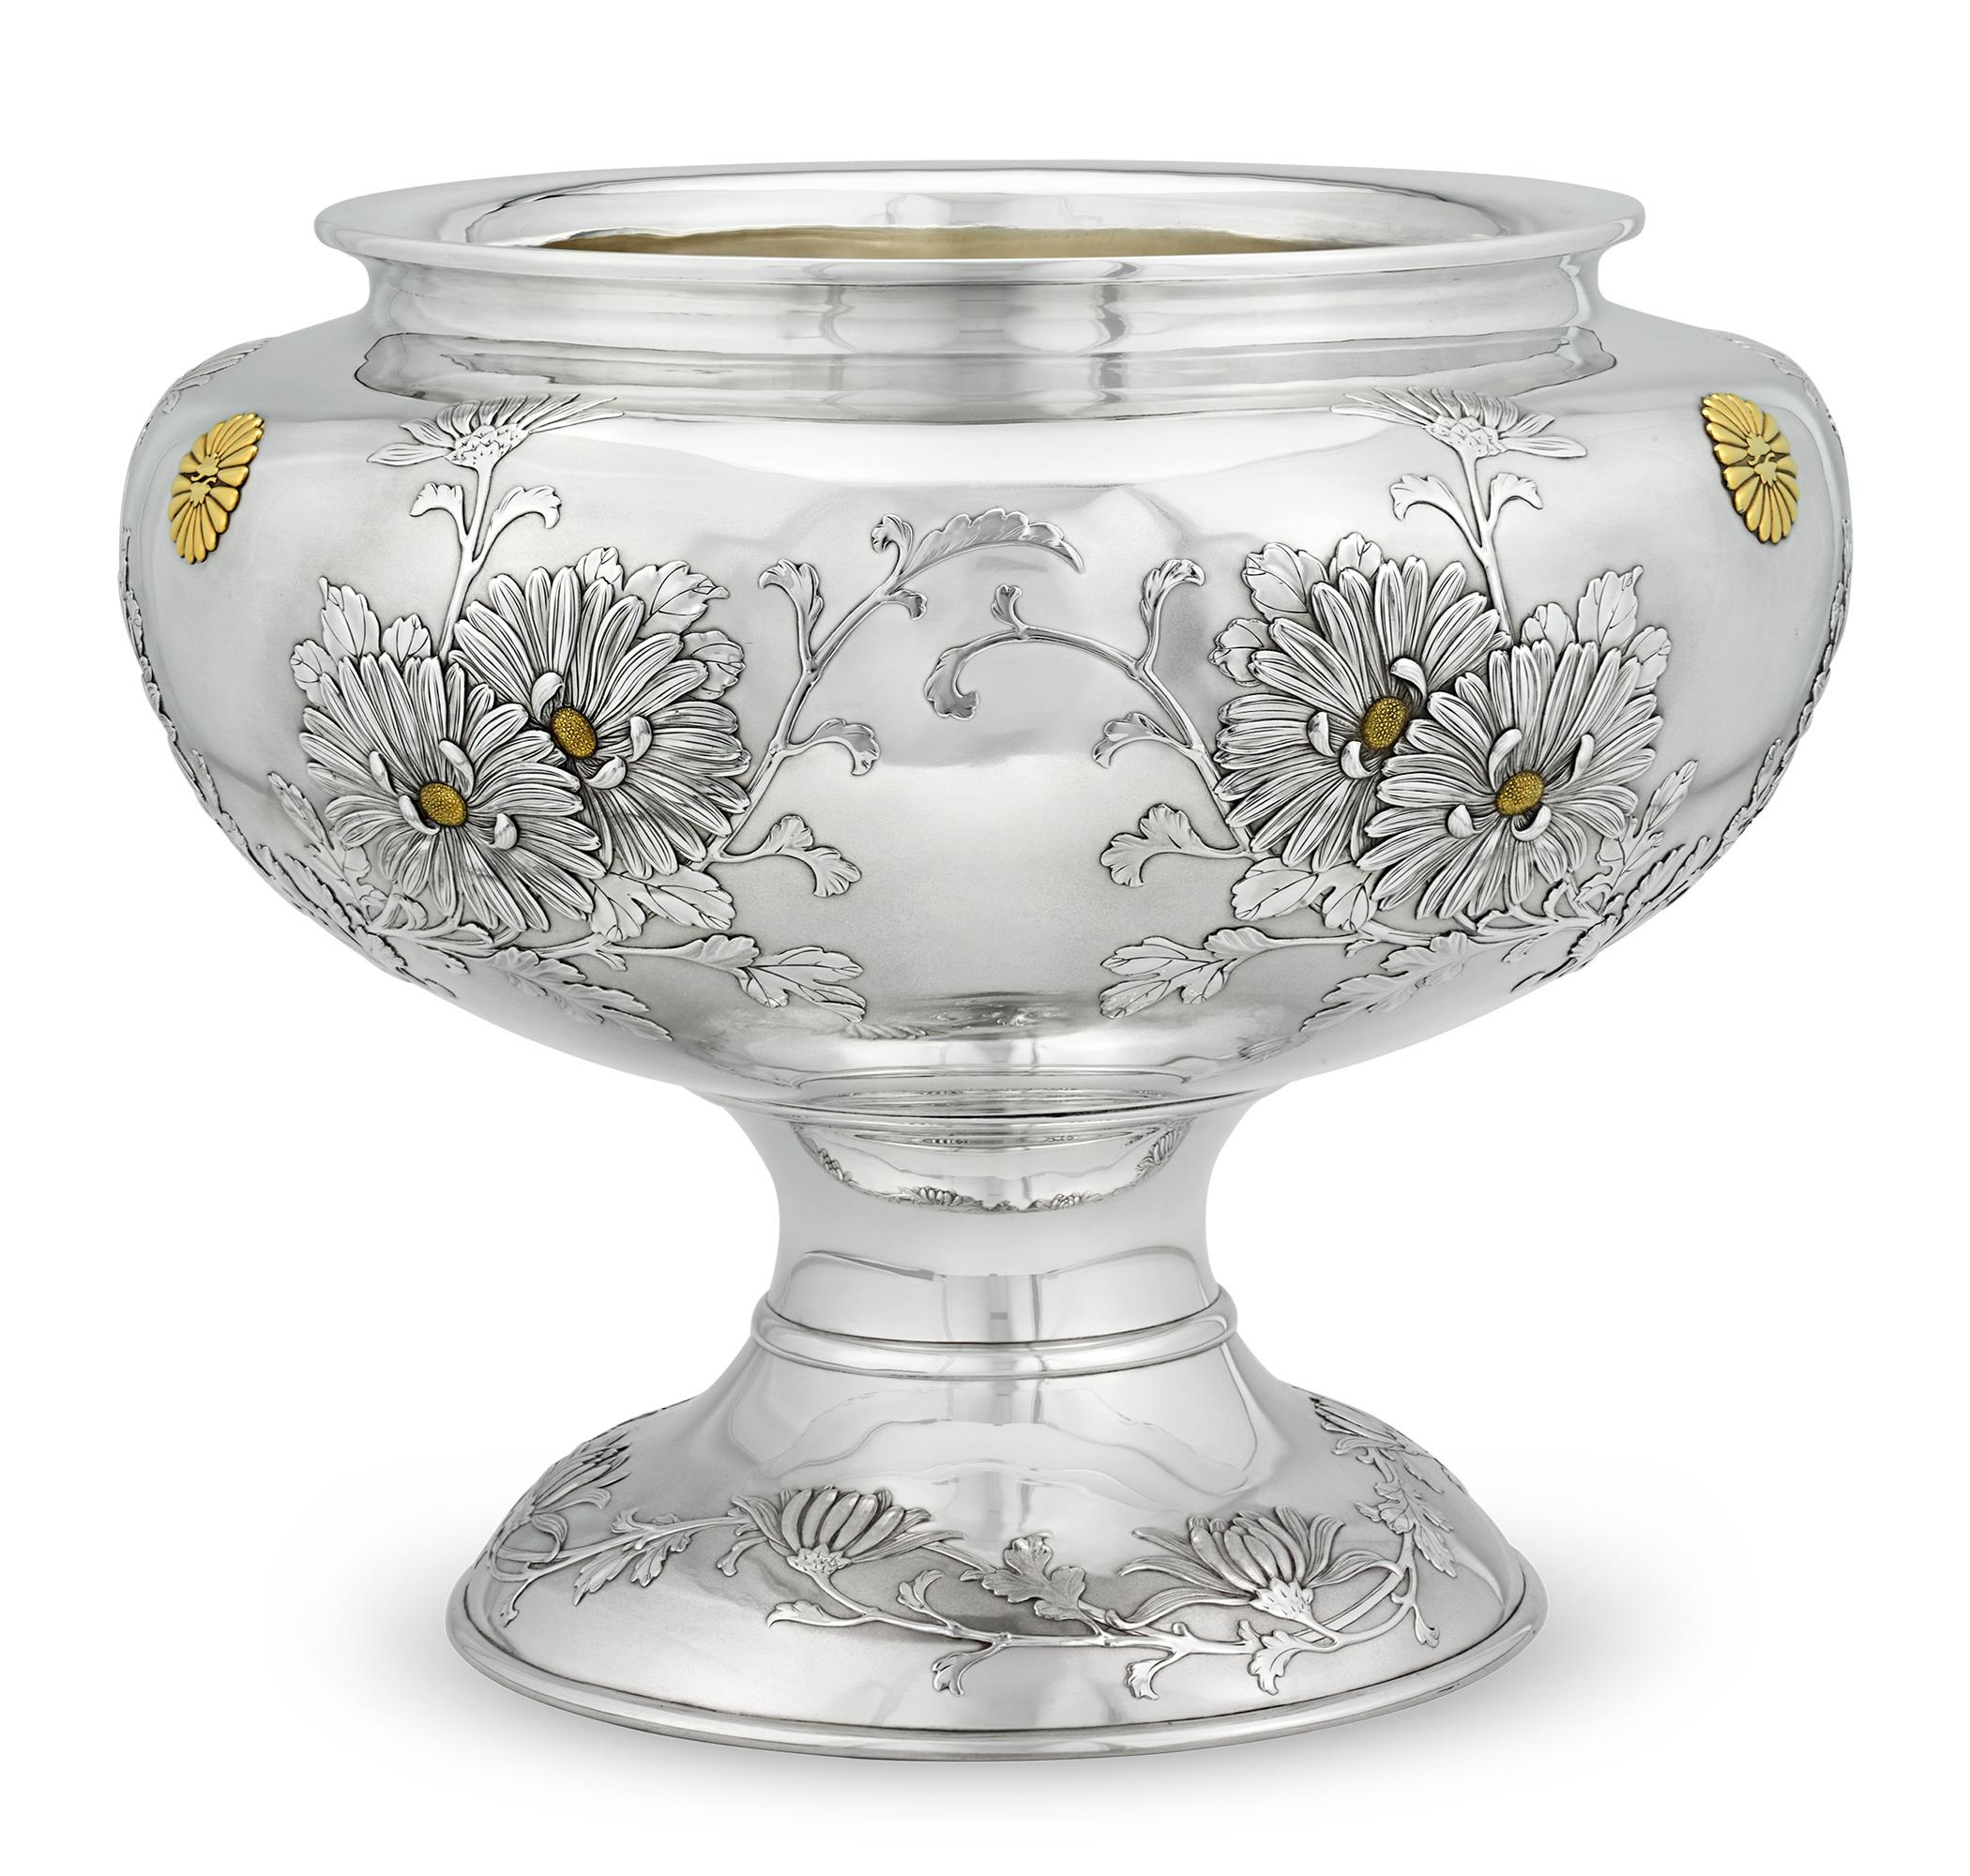 This monumental solid silver flower bowl was crafted for the household of Emperor Meiji. This rare treasure is emblazoned with the Imperial heraldry of gilded chrysanthemums. Handmade by the revered Miyamoto Shoko firm after they received the